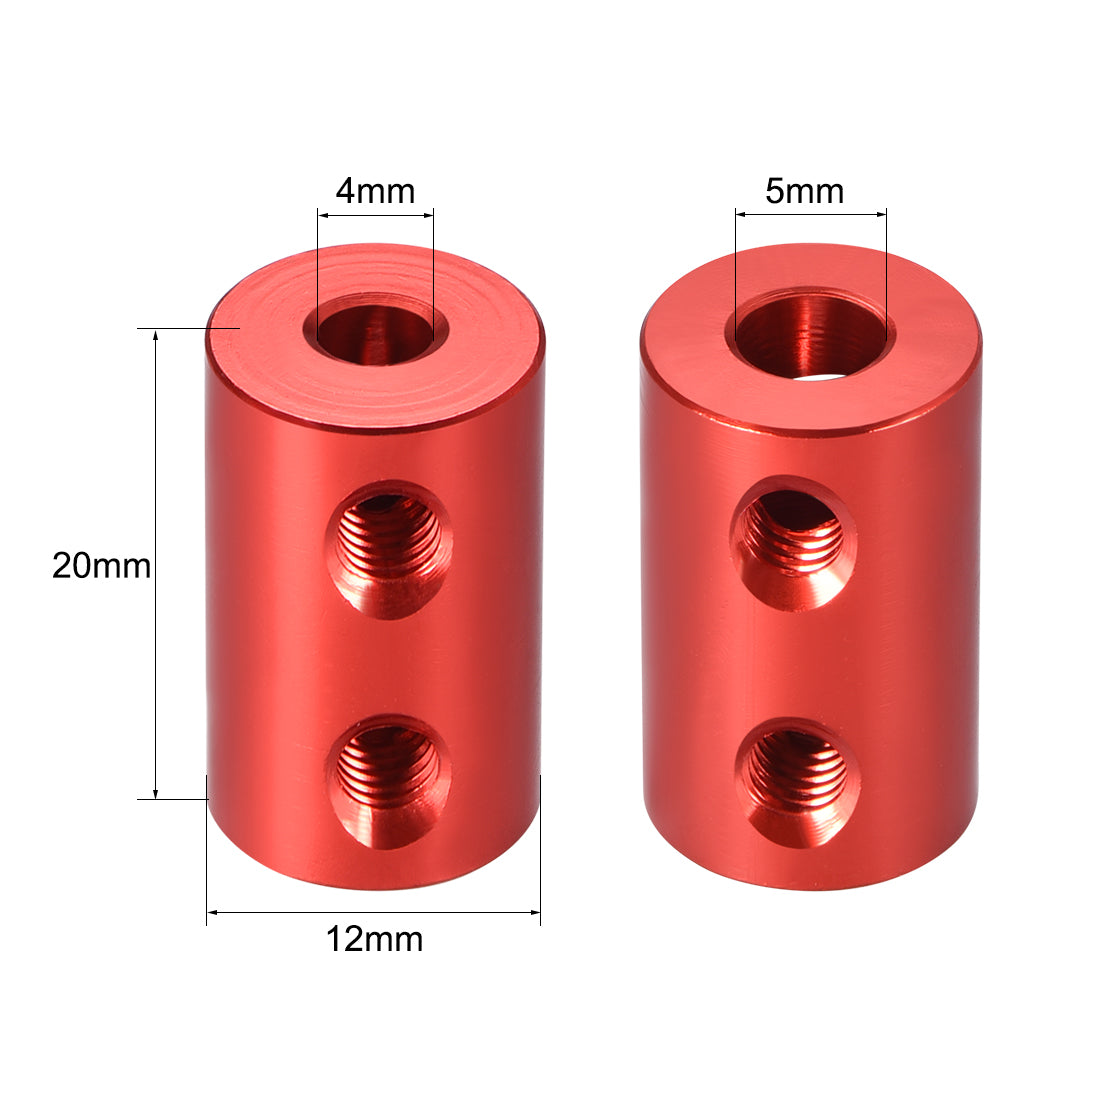 uxcell Uxcell Shaft Coupling 4mm to 5mm Bore L20xD12 Robot Motor Wheel Rigid Coupler Connector Red 2 PCS